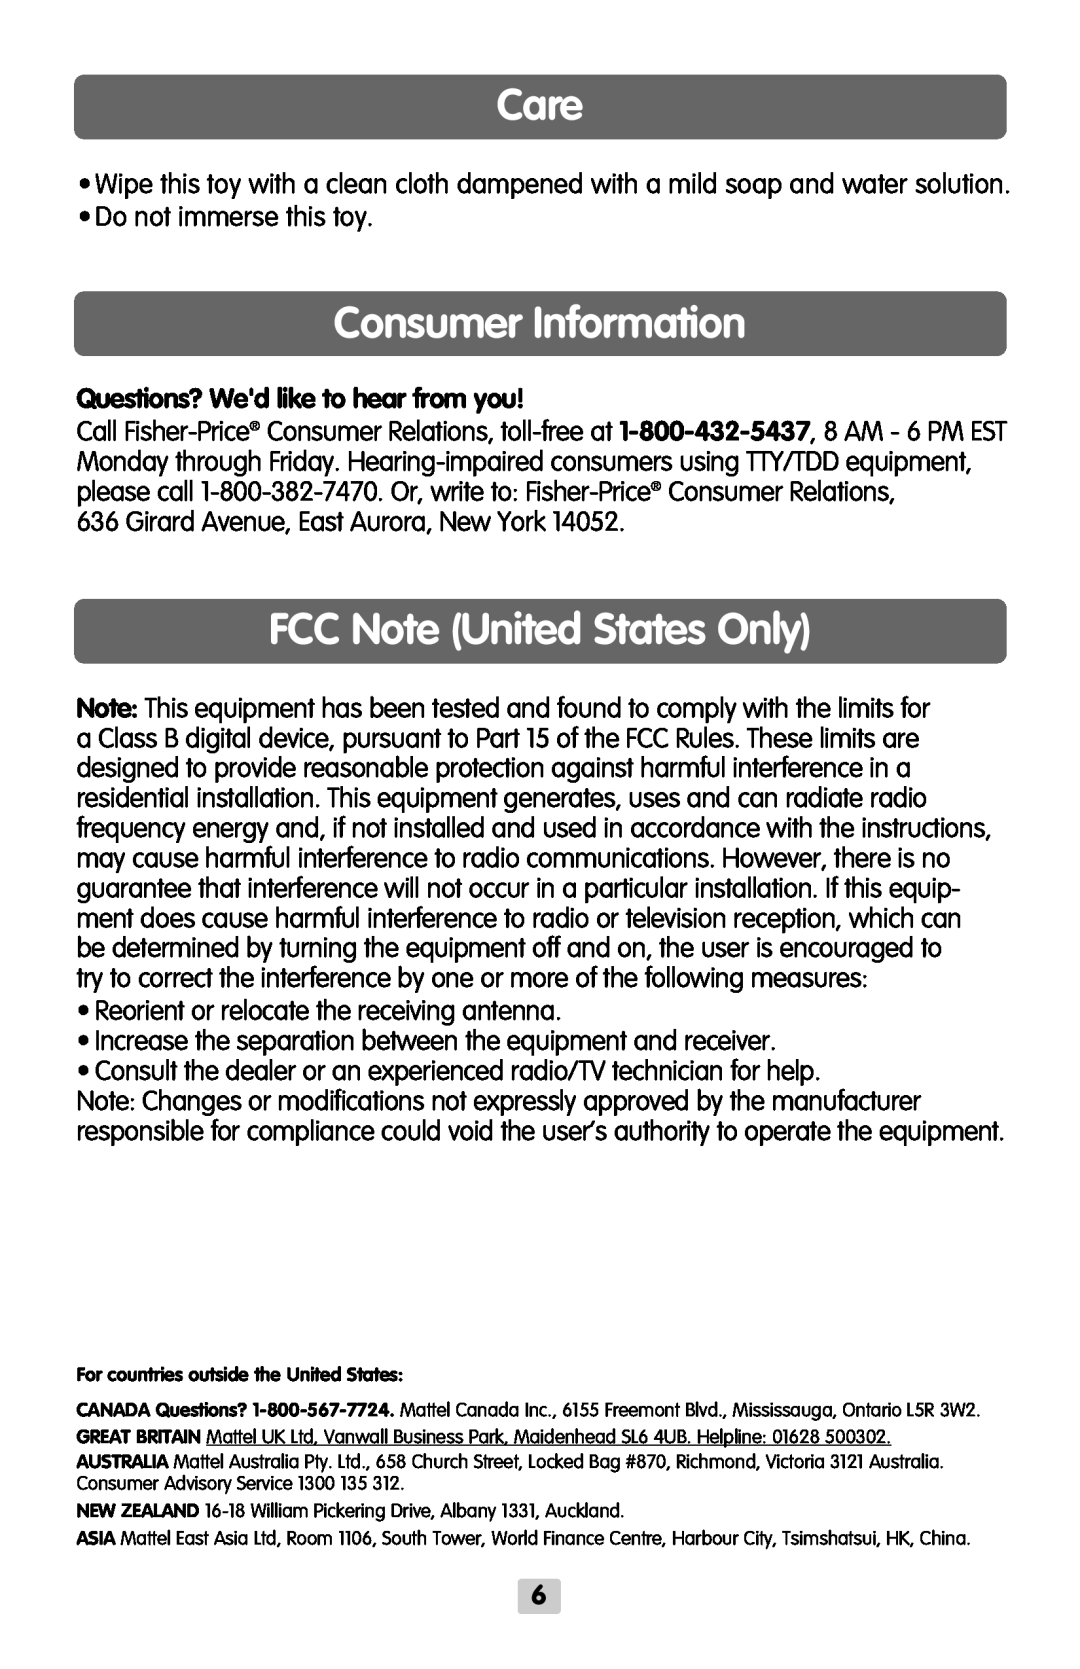 Fisher-Price B8793 Care, Consumer Information, FCC Note United States Only, Questions? Wed like to hear from you 